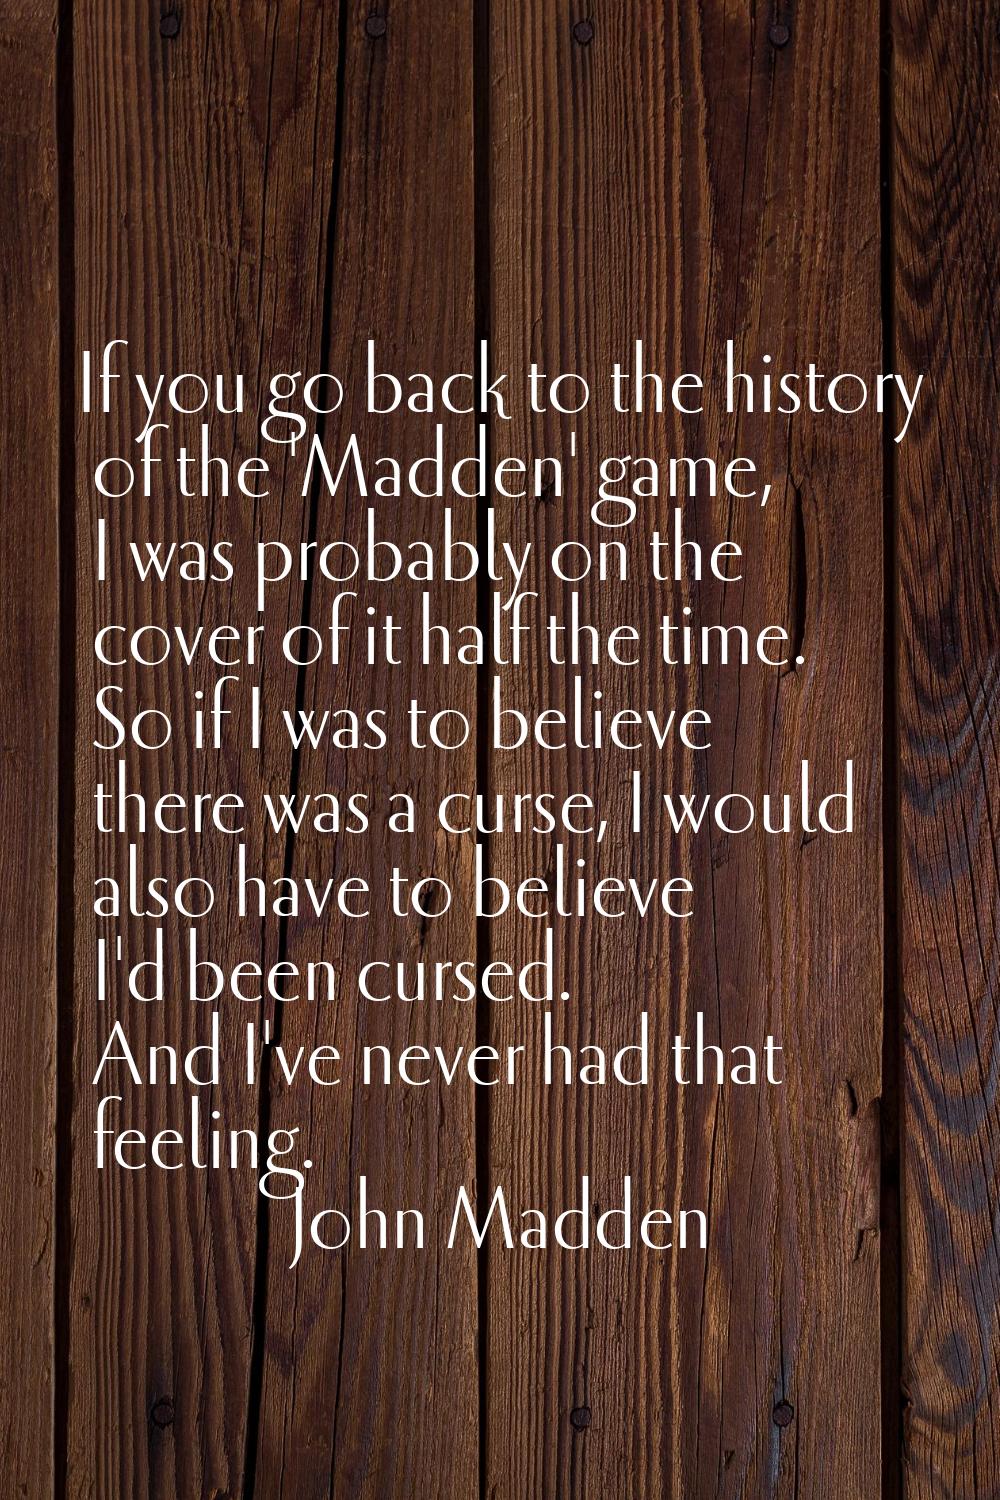 If you go back to the history of the 'Madden' game, I was probably on the cover of it half the time